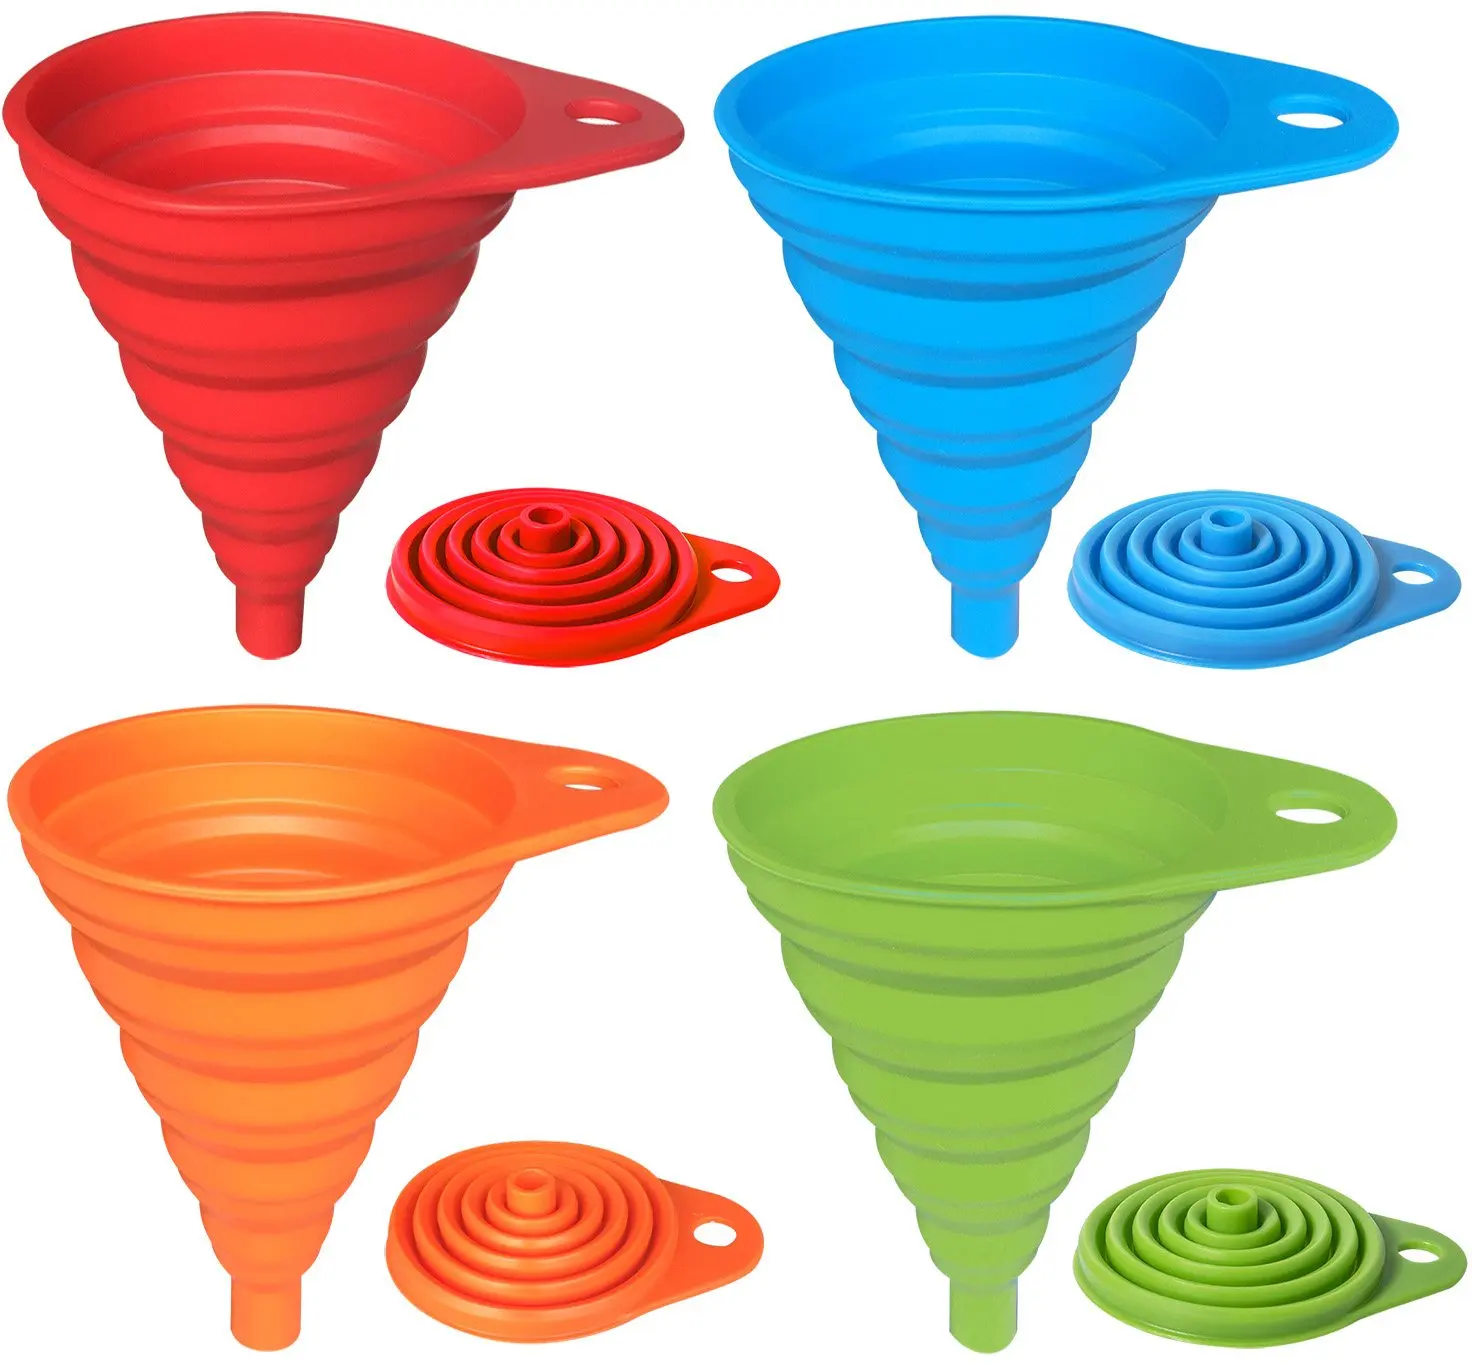 LuLiyLdJ 4 pieces of collapsible funnel 4 sizes of kitchen silicone funnel gel collapsible funnel for household use